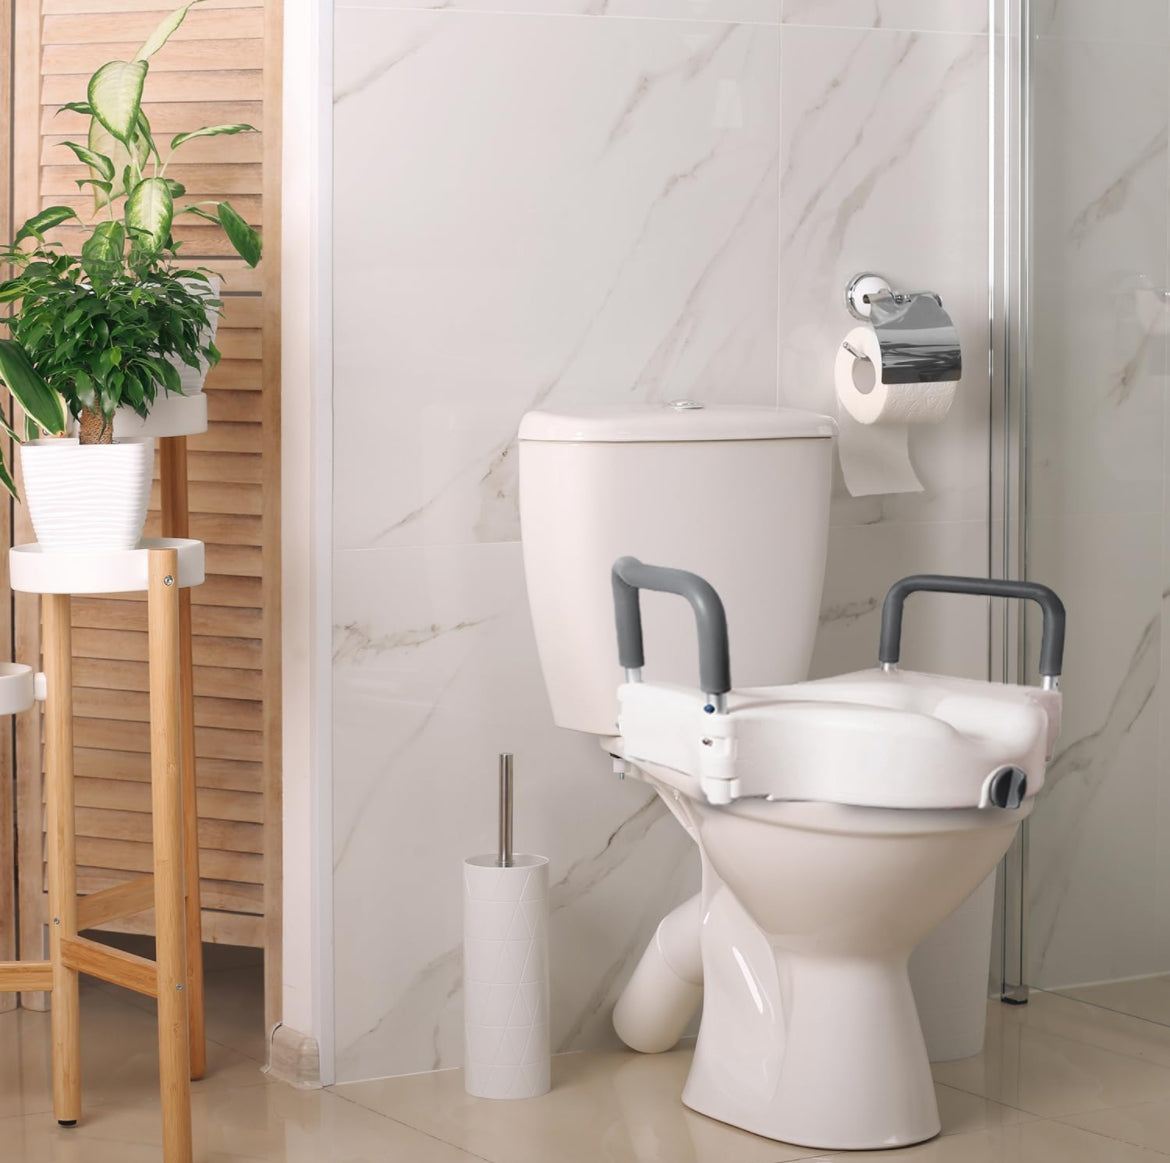 Vaunn Raised Toilet Seat and Elevated Commode Booster Seat Riser - Selzalot